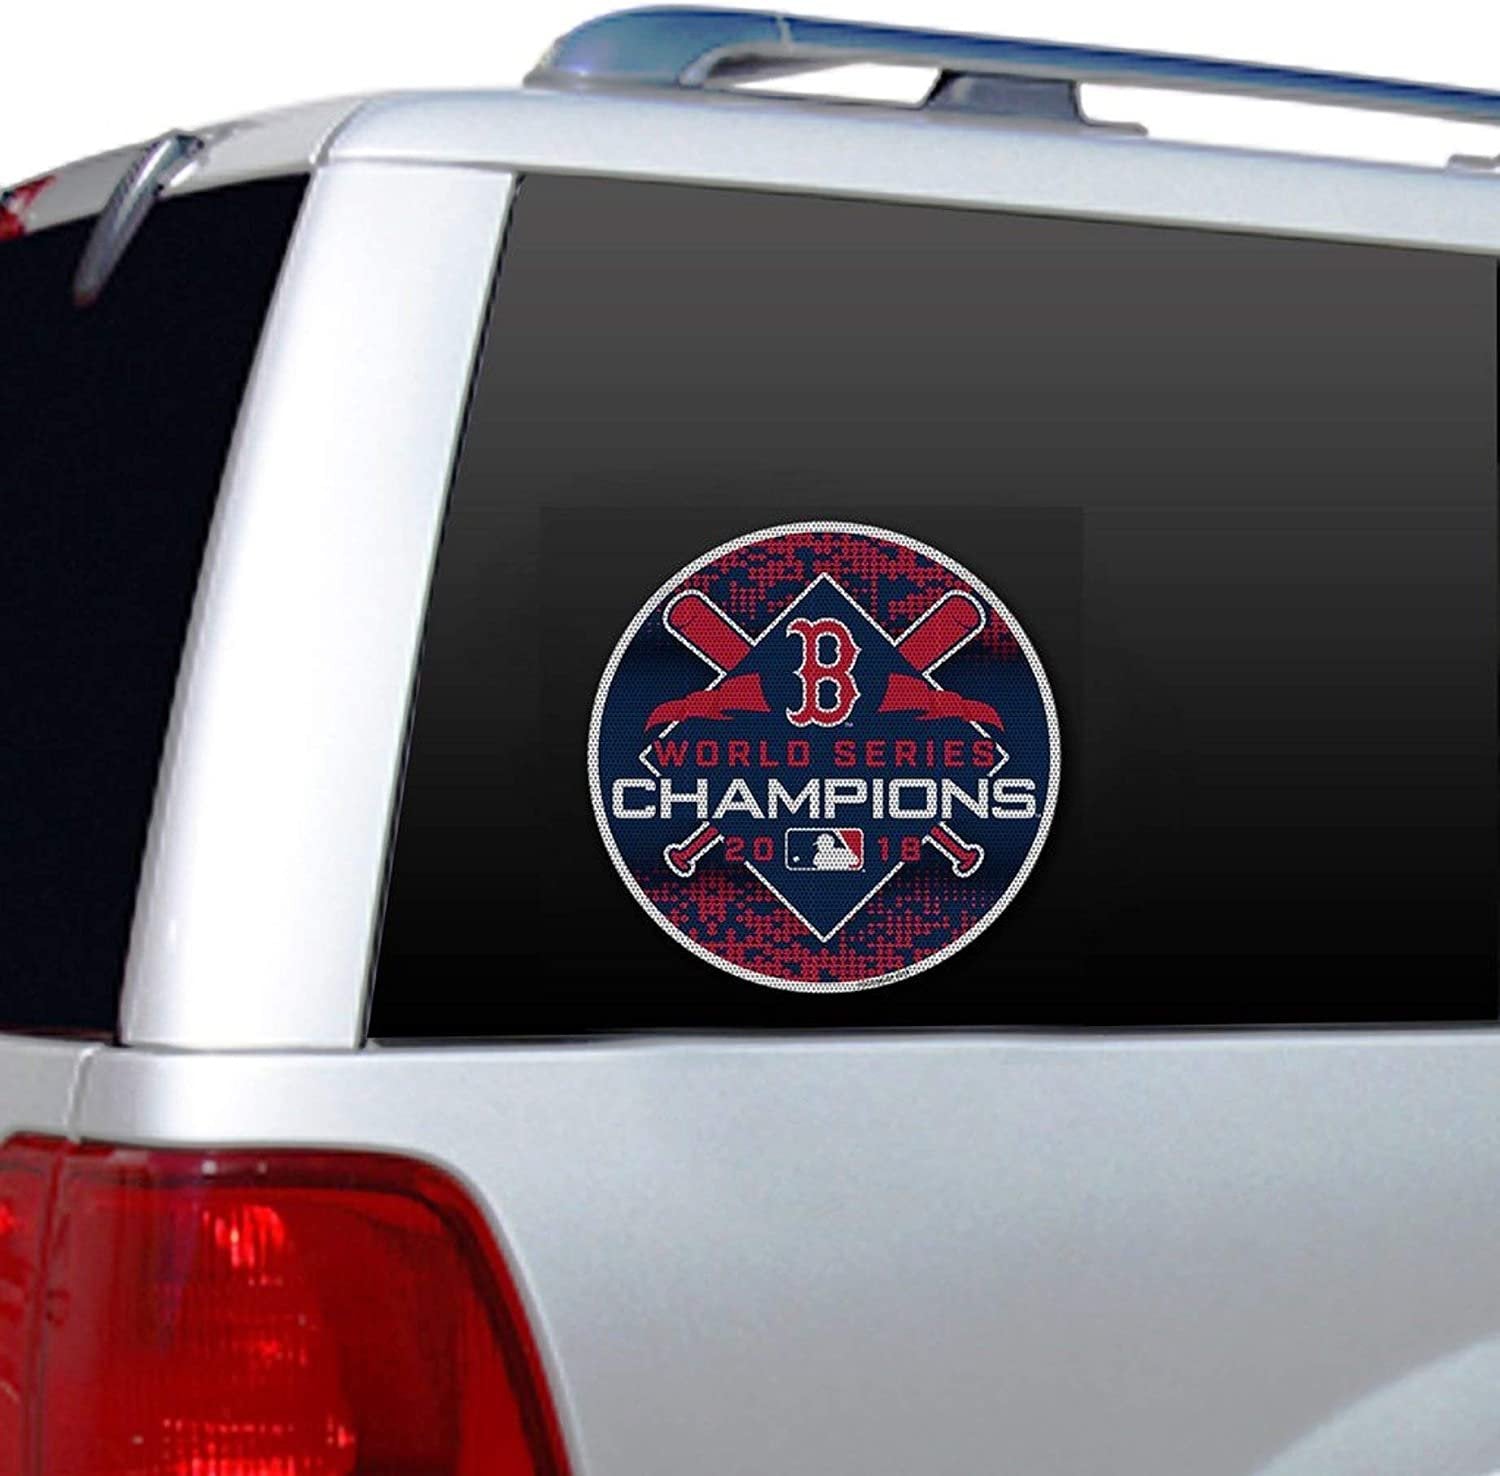 Boston Red Sox 2018 World Series Champions Large Perforated One-Way Vision Window Film Auto Die Cut Glass Decal Emblem Sticker Logo Baseball